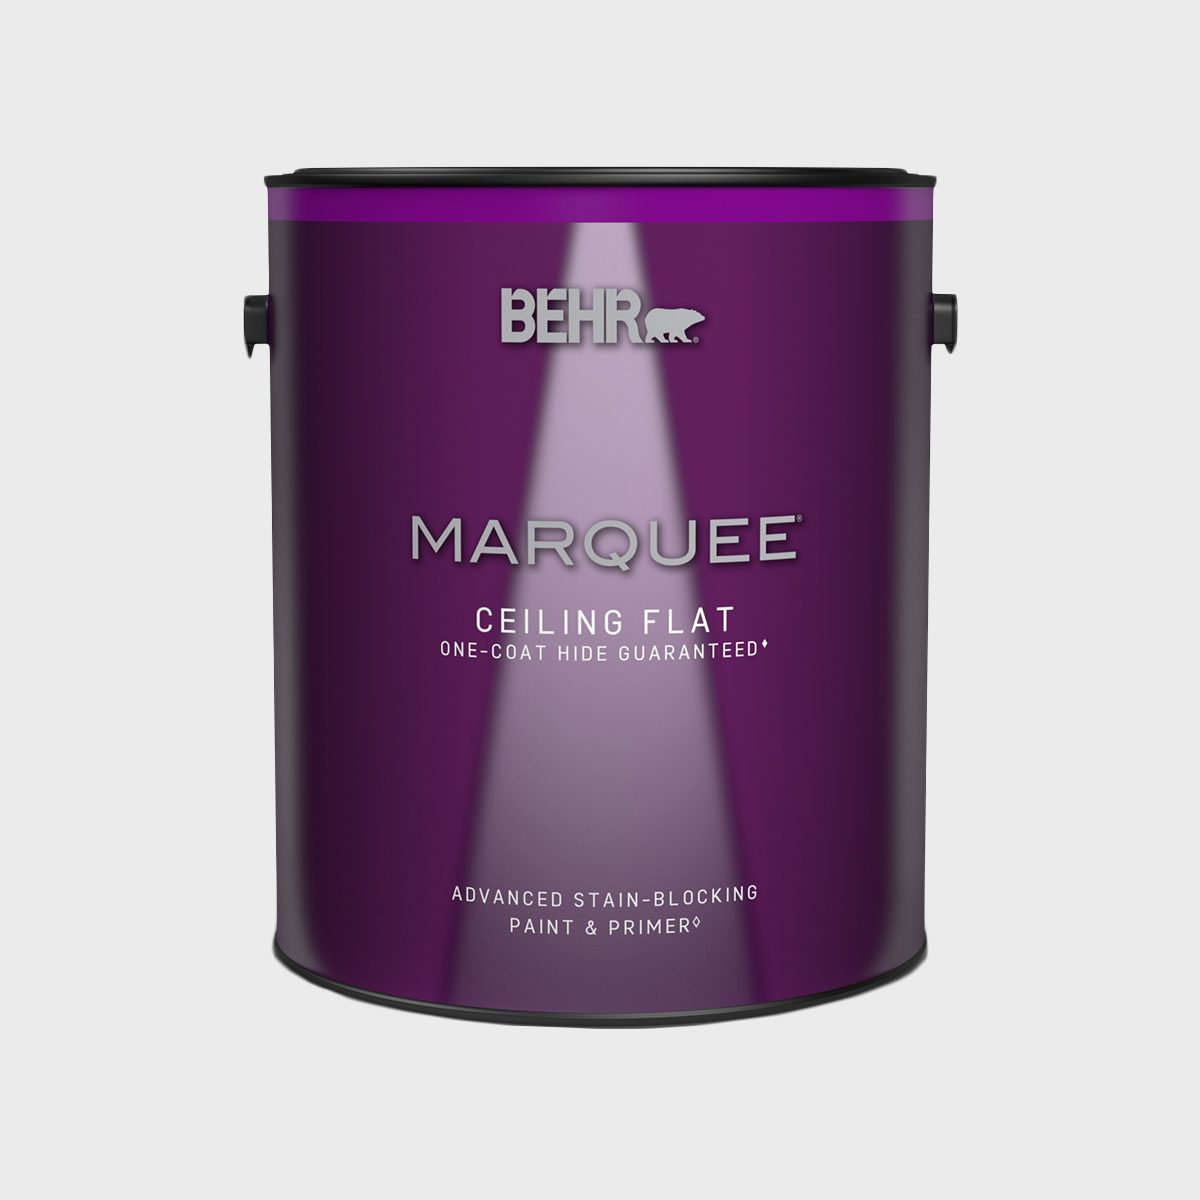 Behrs Marquee Ultra Interior Paint And Primer Ecomm Via Homedepot.com